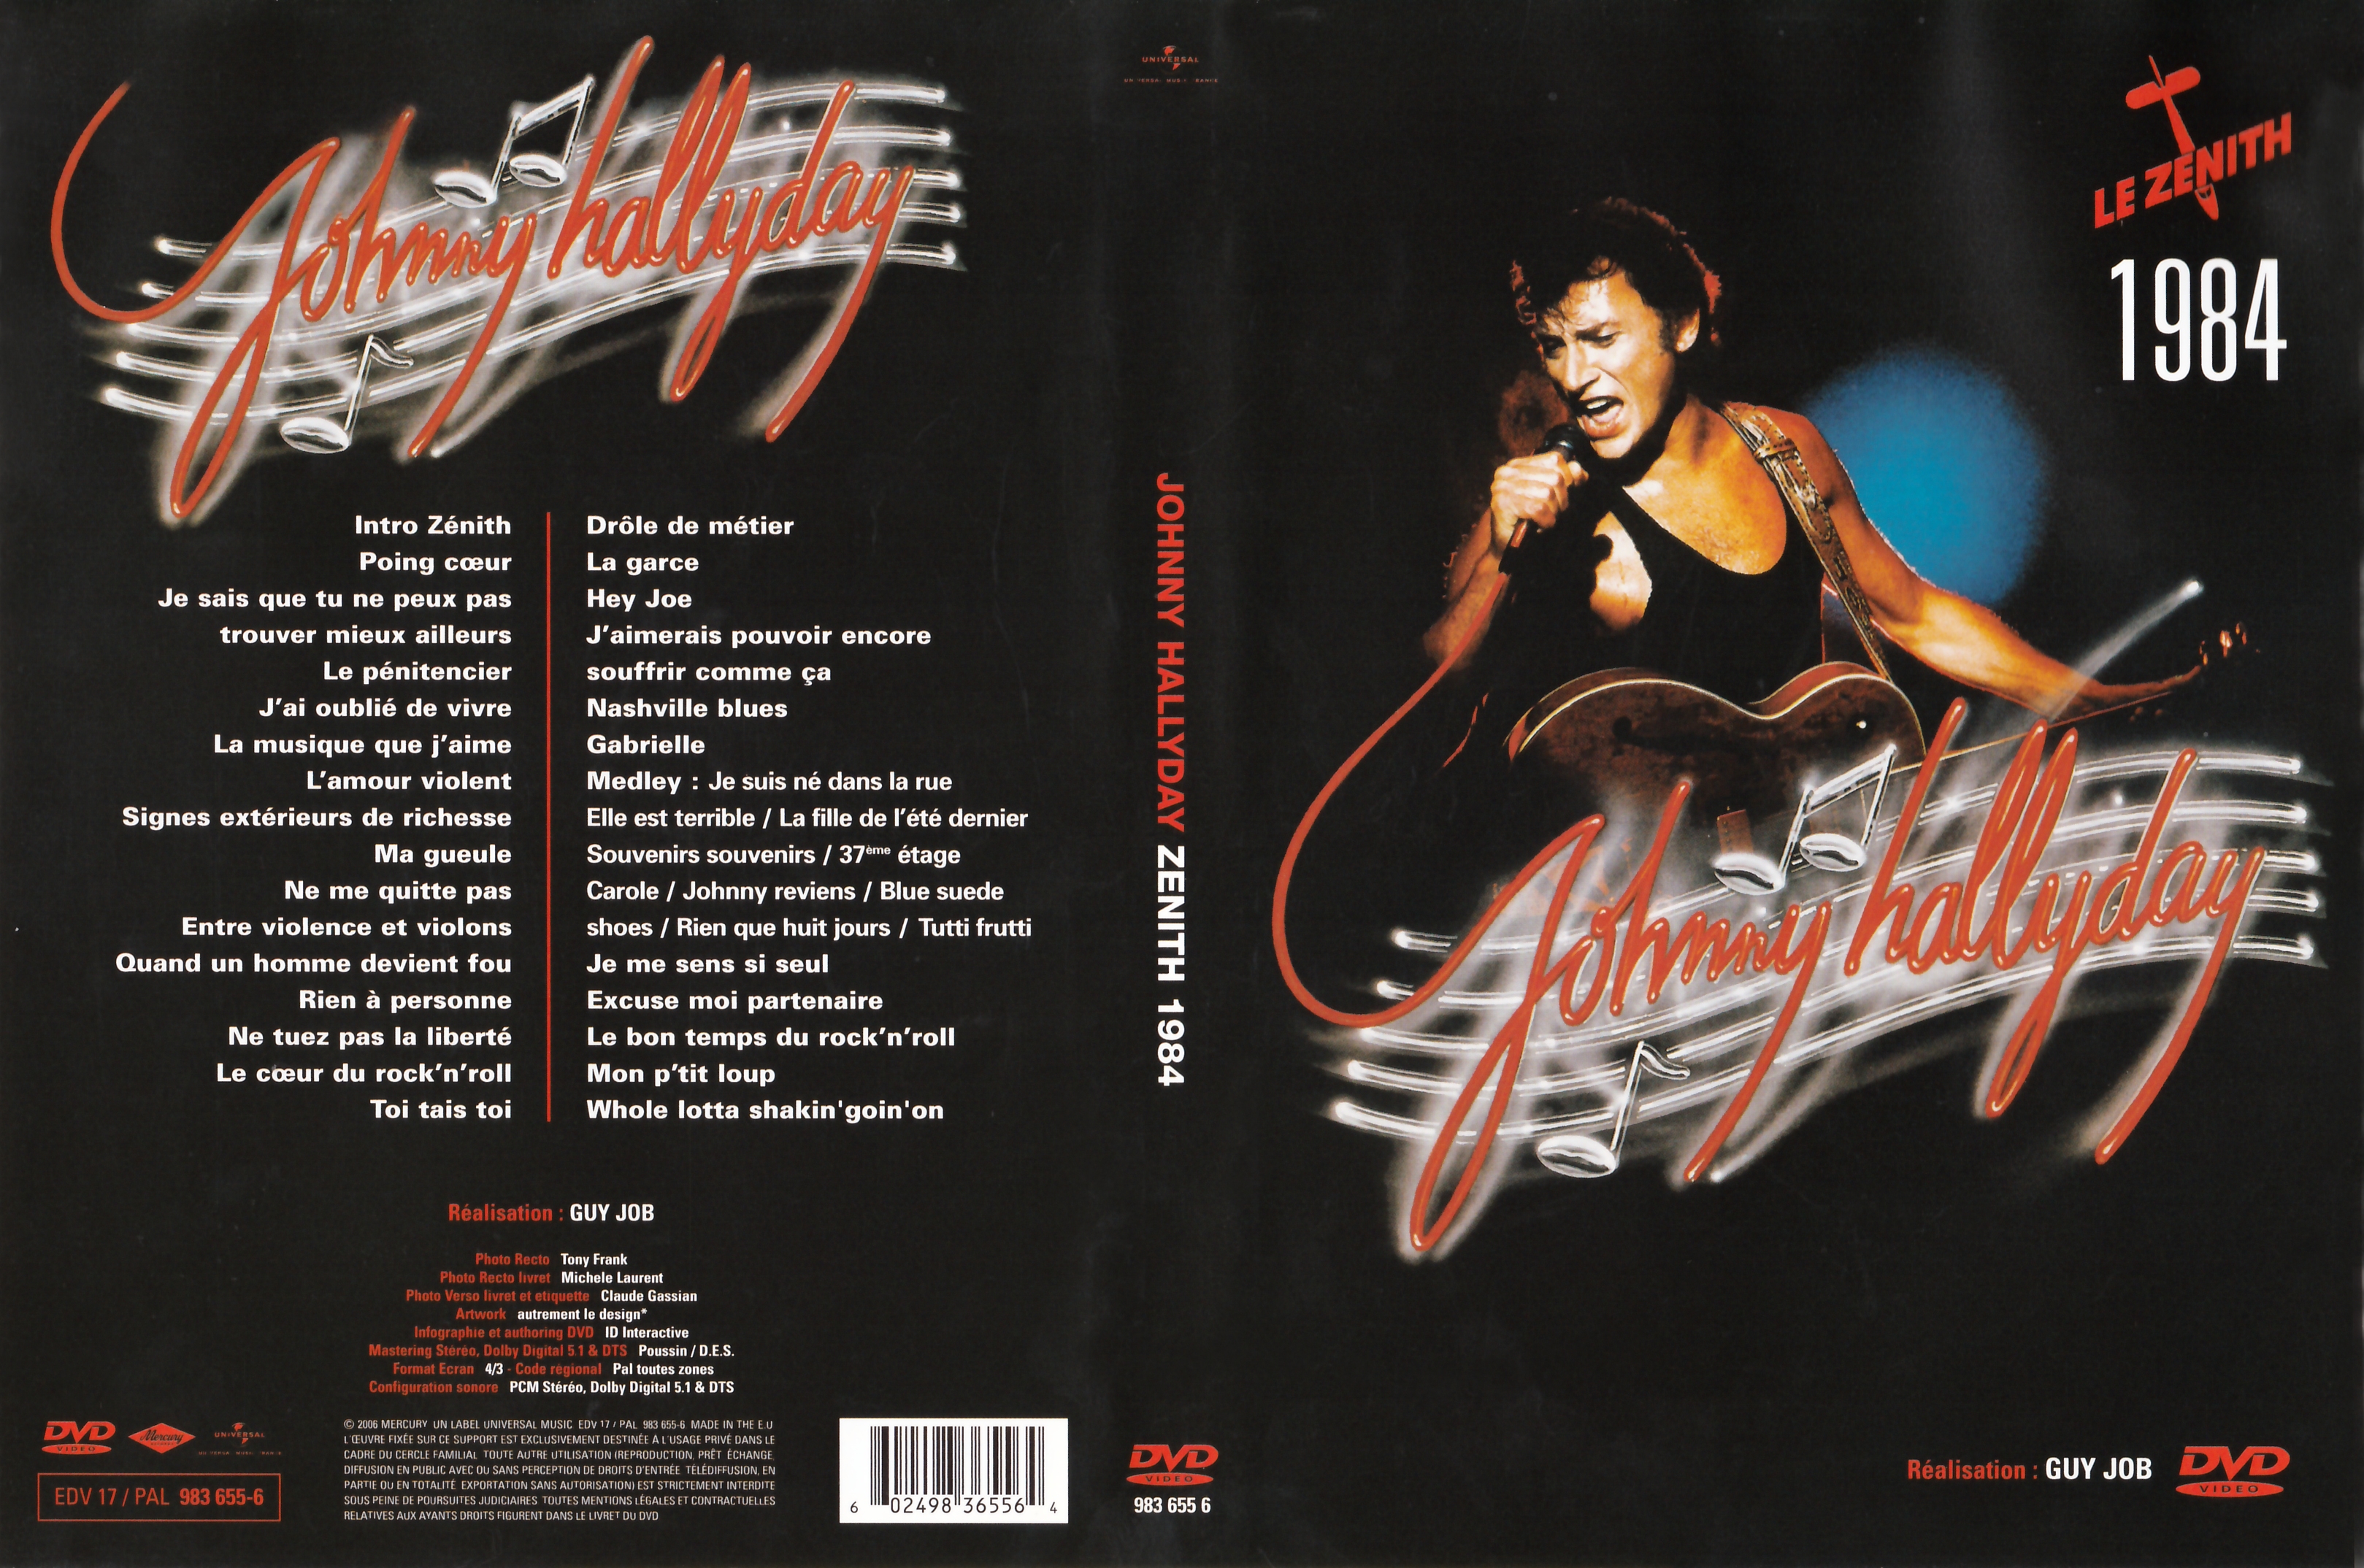 Jaquette DVD Johnny Hallyday Le Zenith (1984)